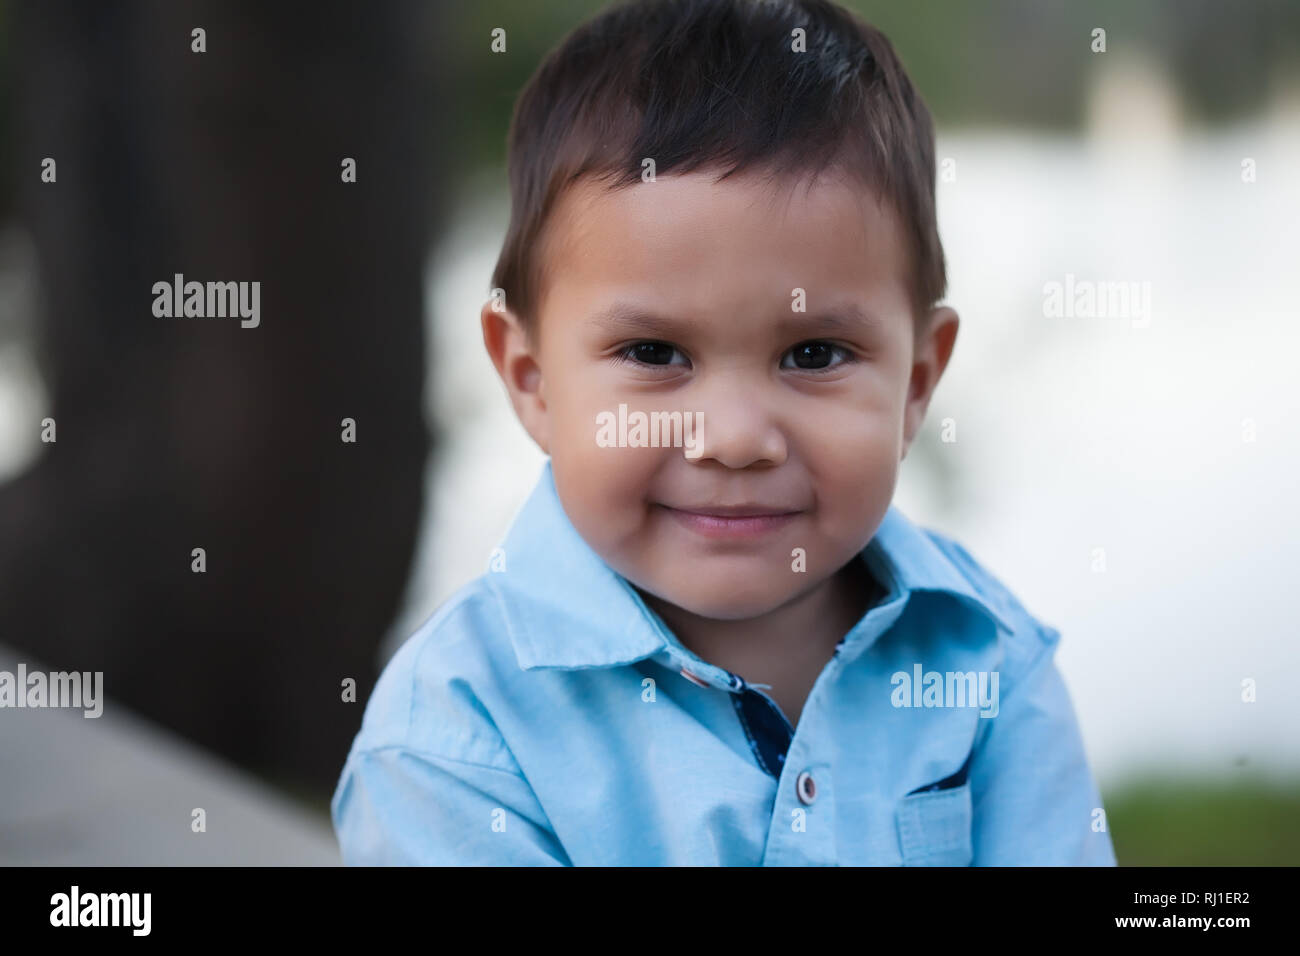 Latino boy wearing blue shirt and a thoughtful look,  with a relaxed smile but also looking uncertain. Stock Photo